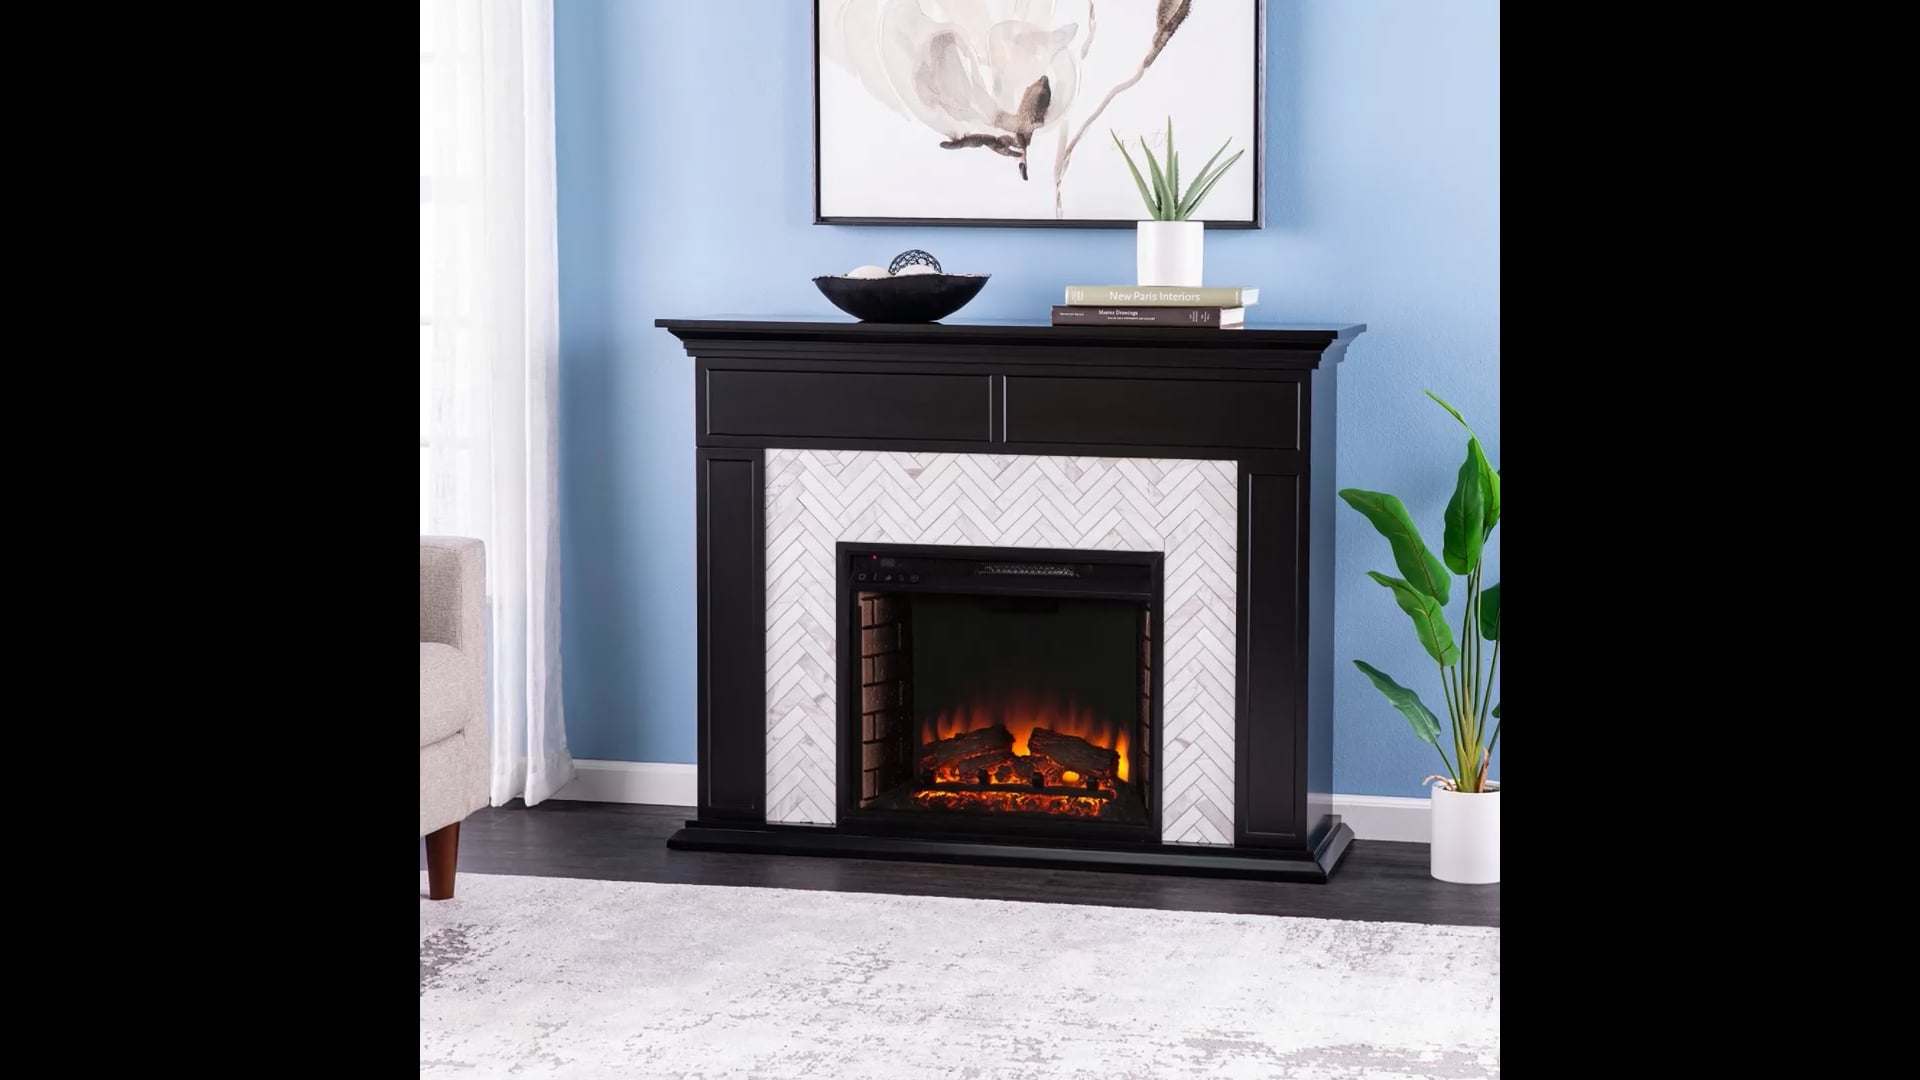 Torron Marble Tiled Electric Fireplace - Black